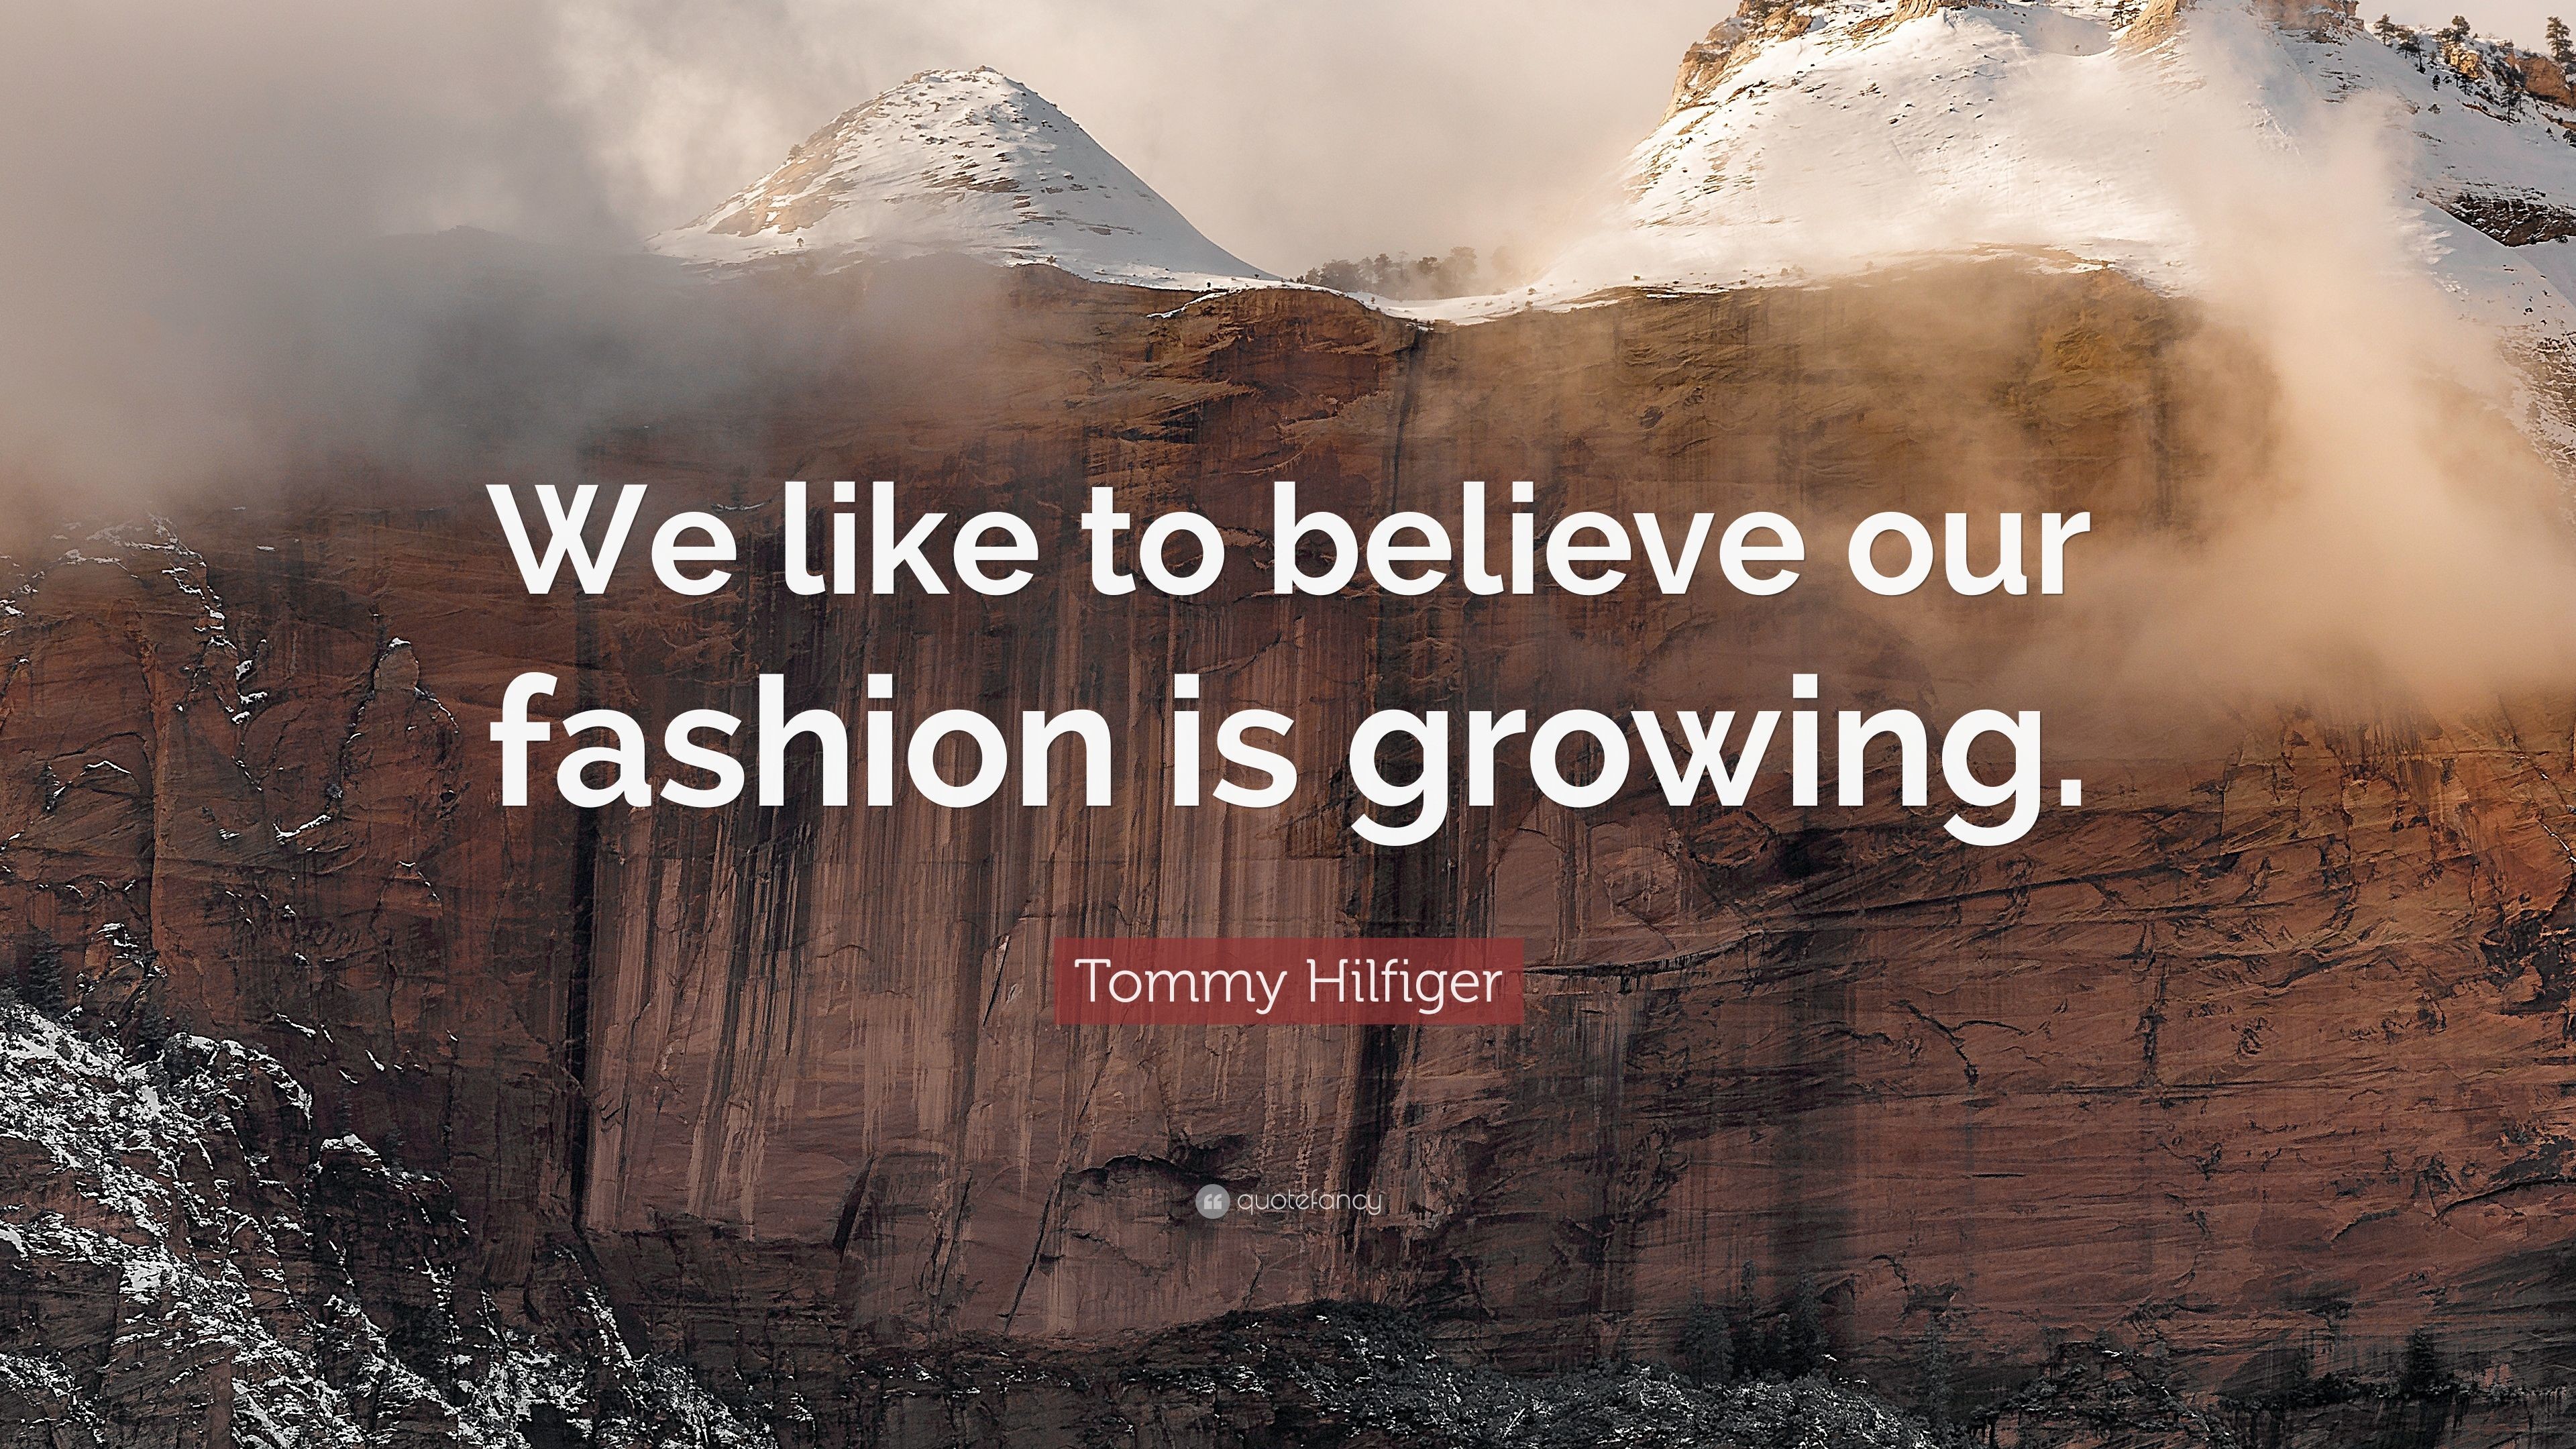 3840x2160 Tommy Hilfiger Quote: “We like to believe our fashion is growing.”